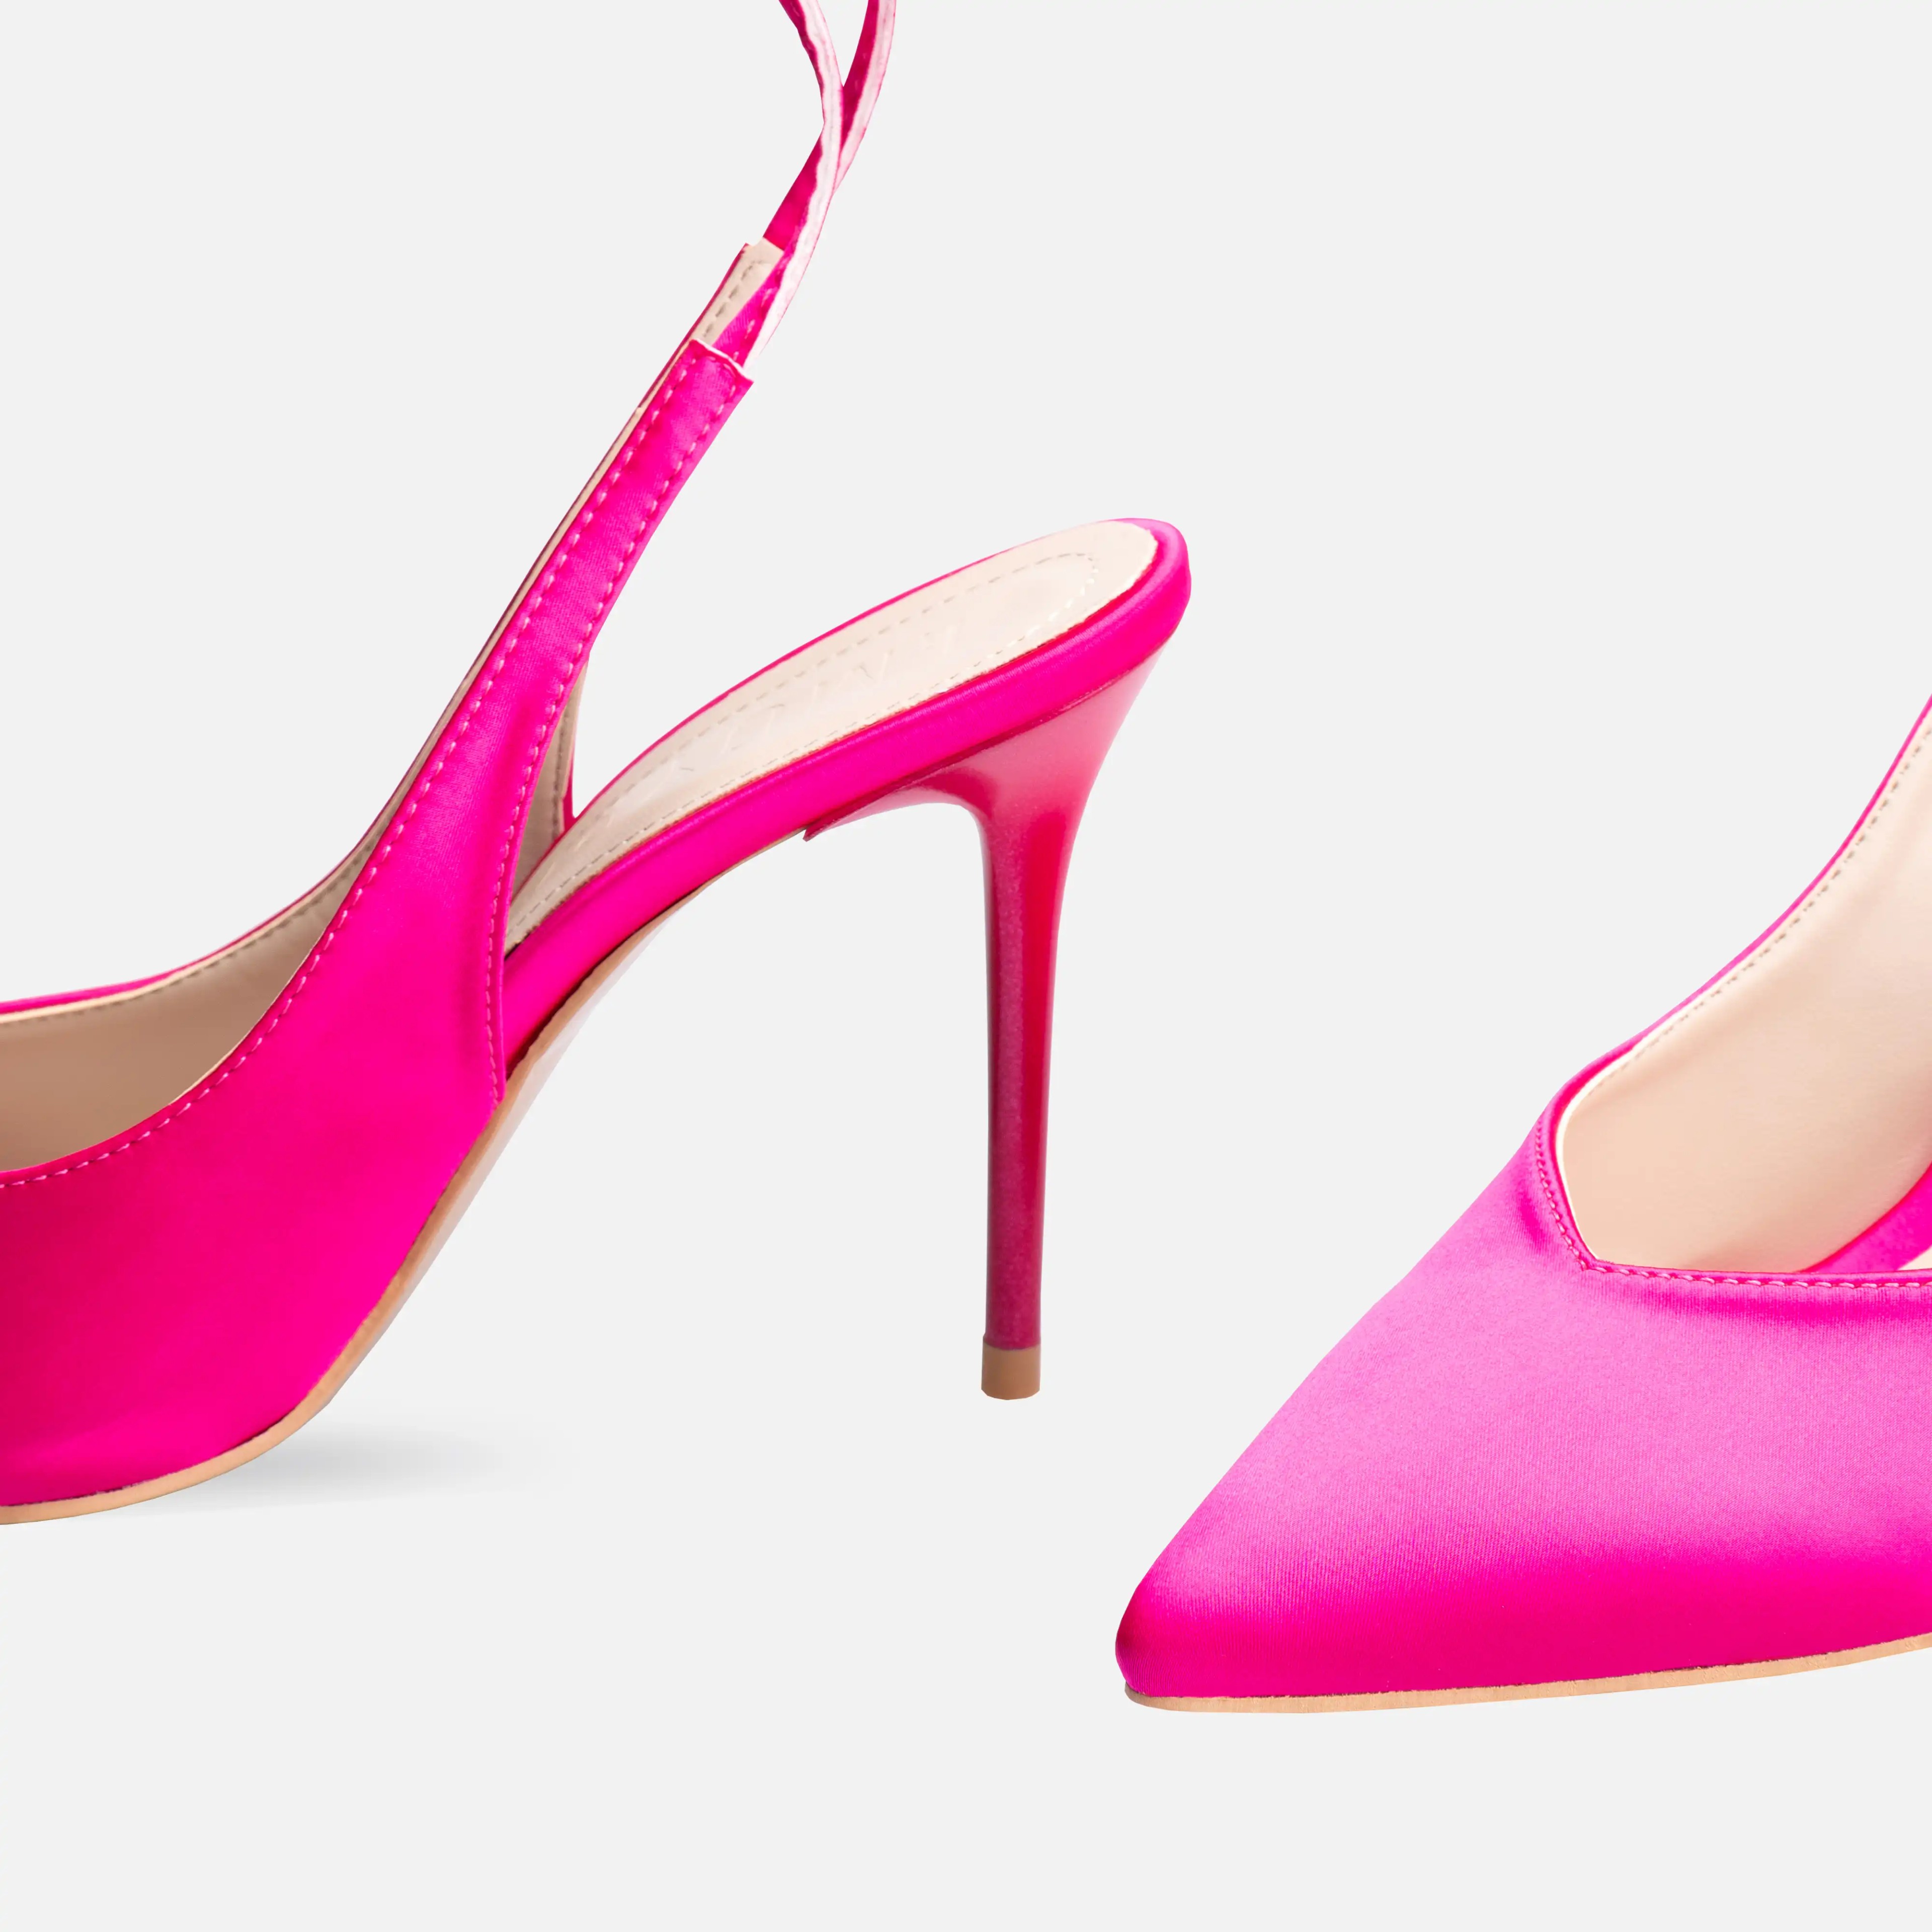 Satin Lace-up Thin High-Heeled Pumps - Fuchsia Color